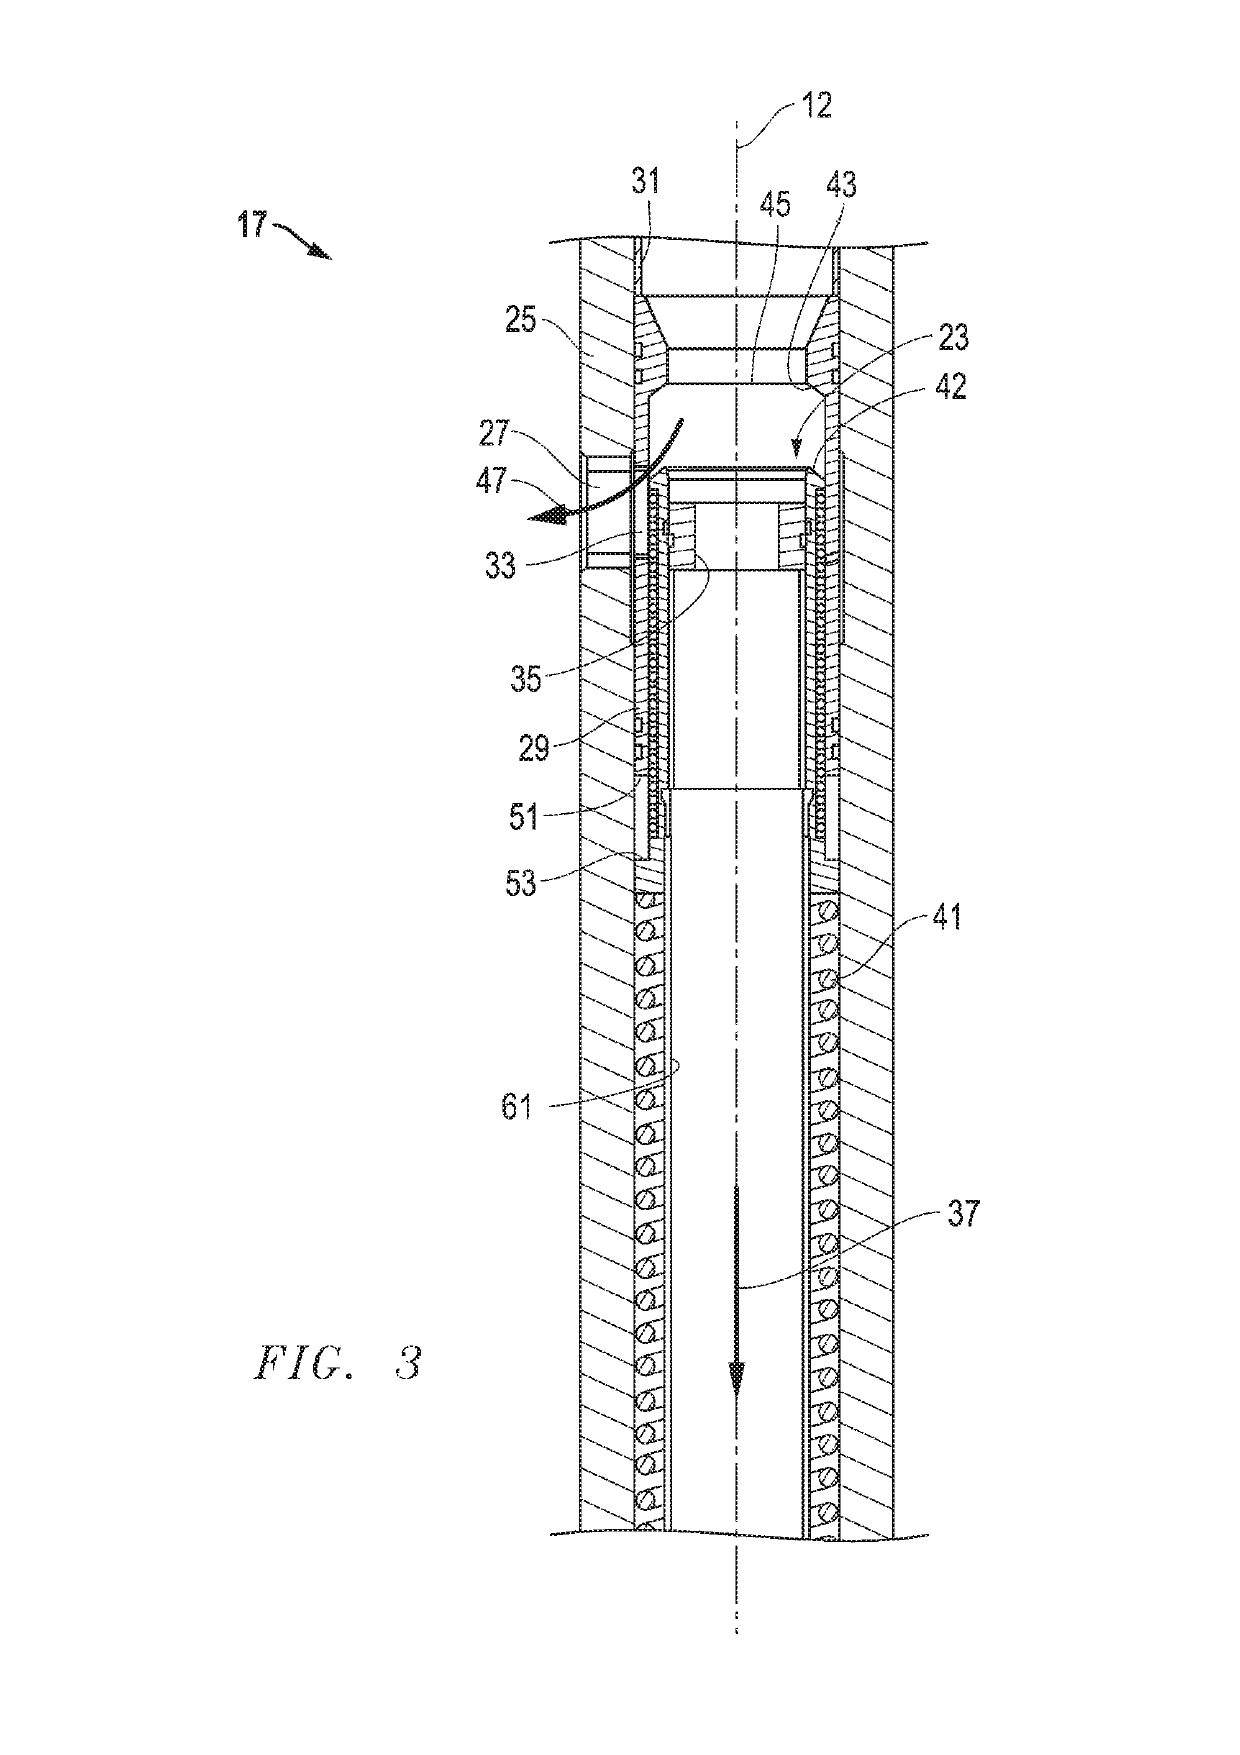 Downhole flow diversion device with oscillation damper